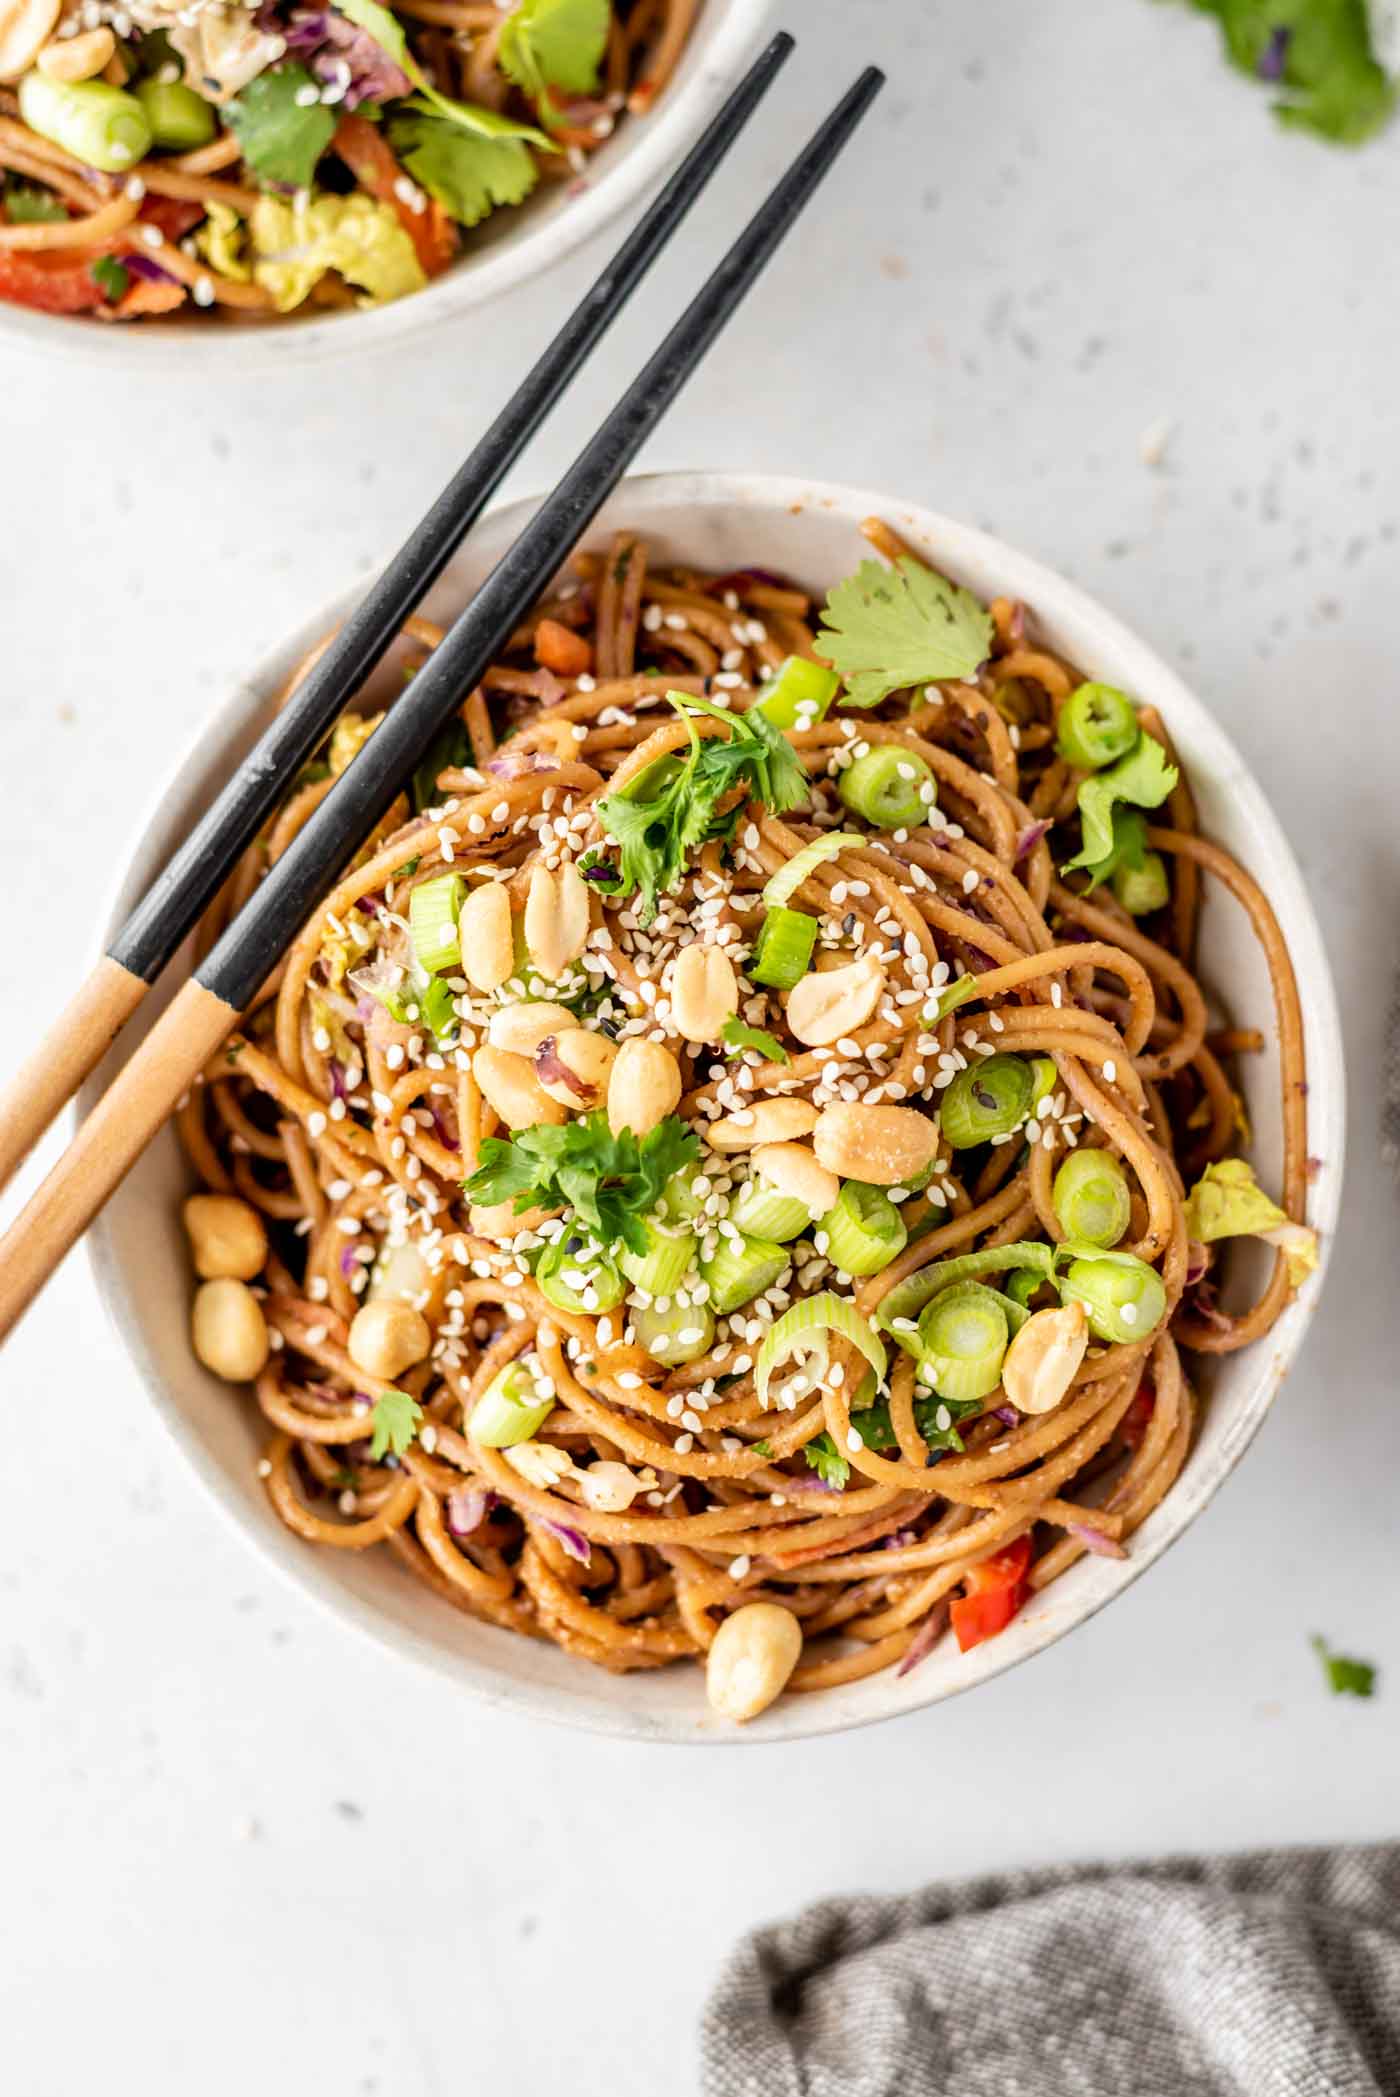 A bowl of noodles topped with green onions, peanuts and cilantro with a set of chopsticks sitting on the bowl.